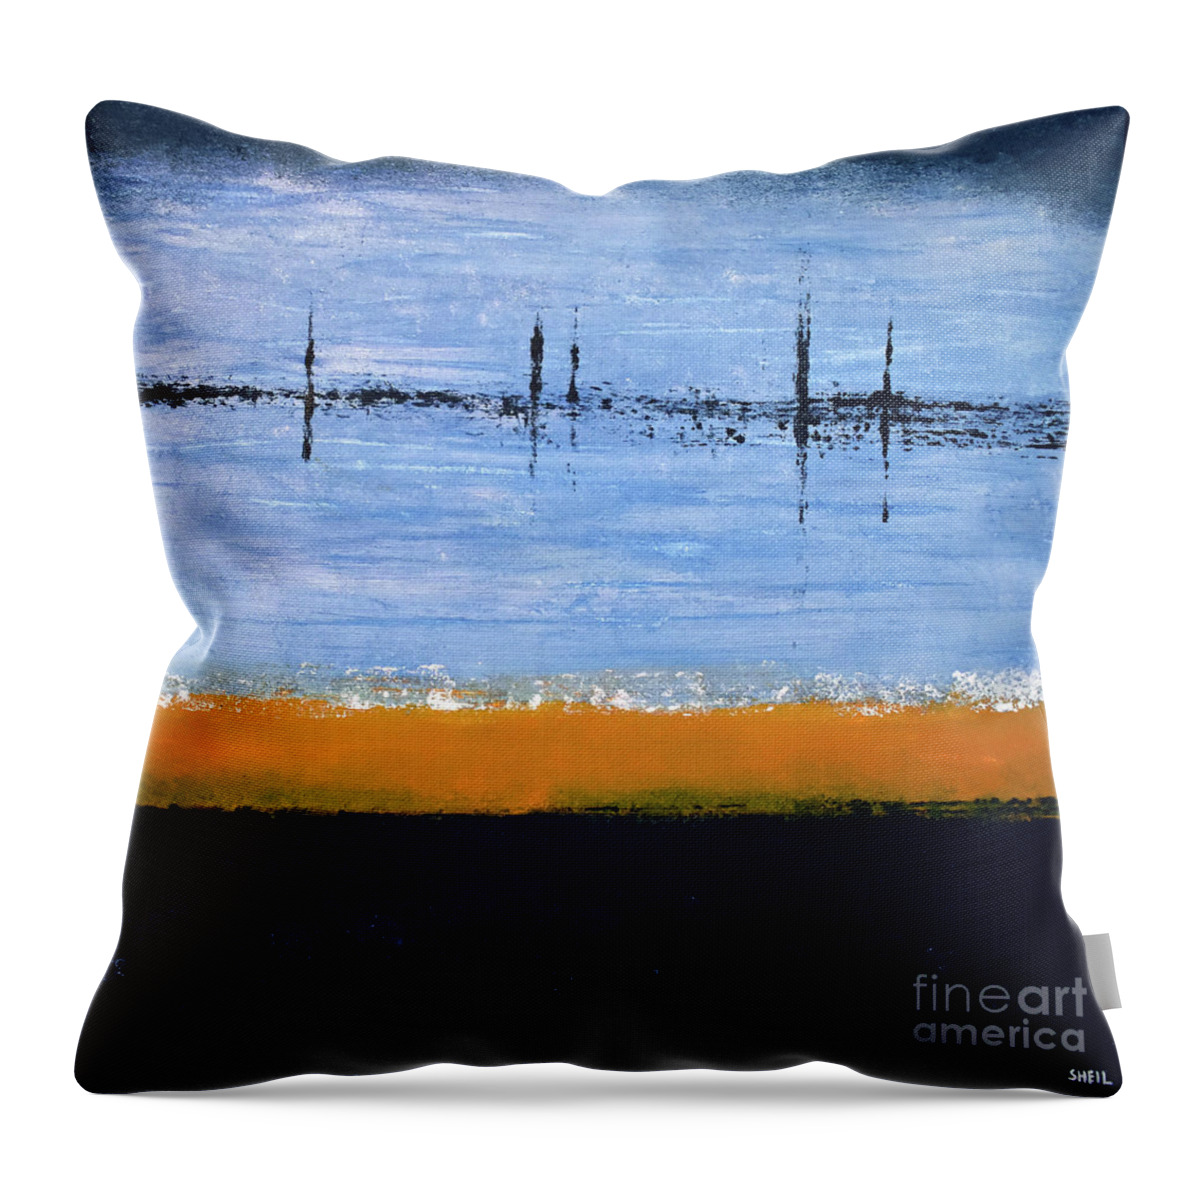 Abstract Throw Pillow featuring the painting Regatta by Amanda Sheil